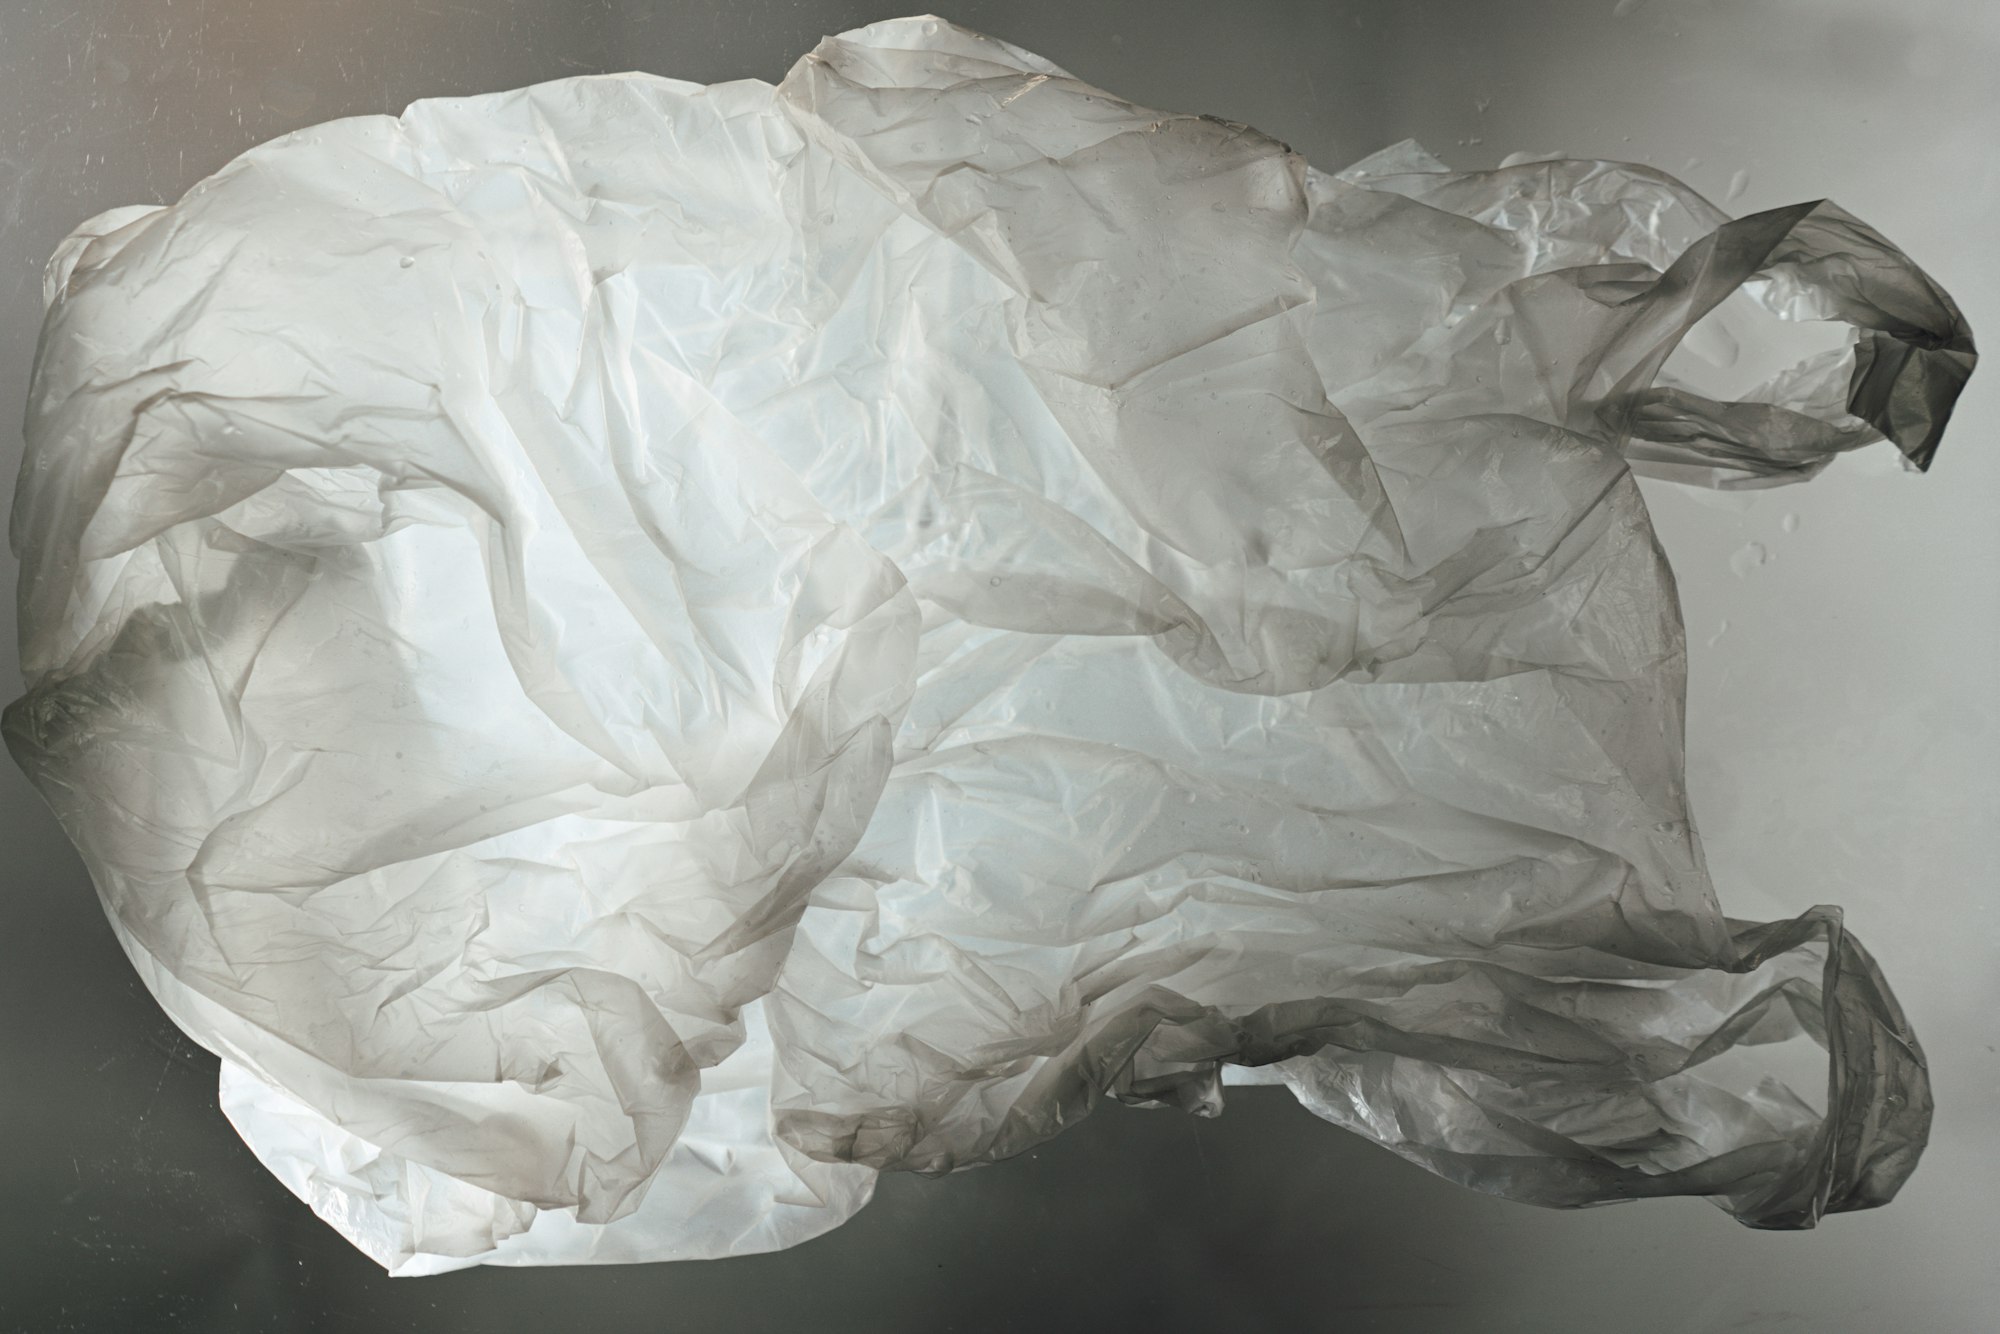 a crumpled piece of plastic floating in the air